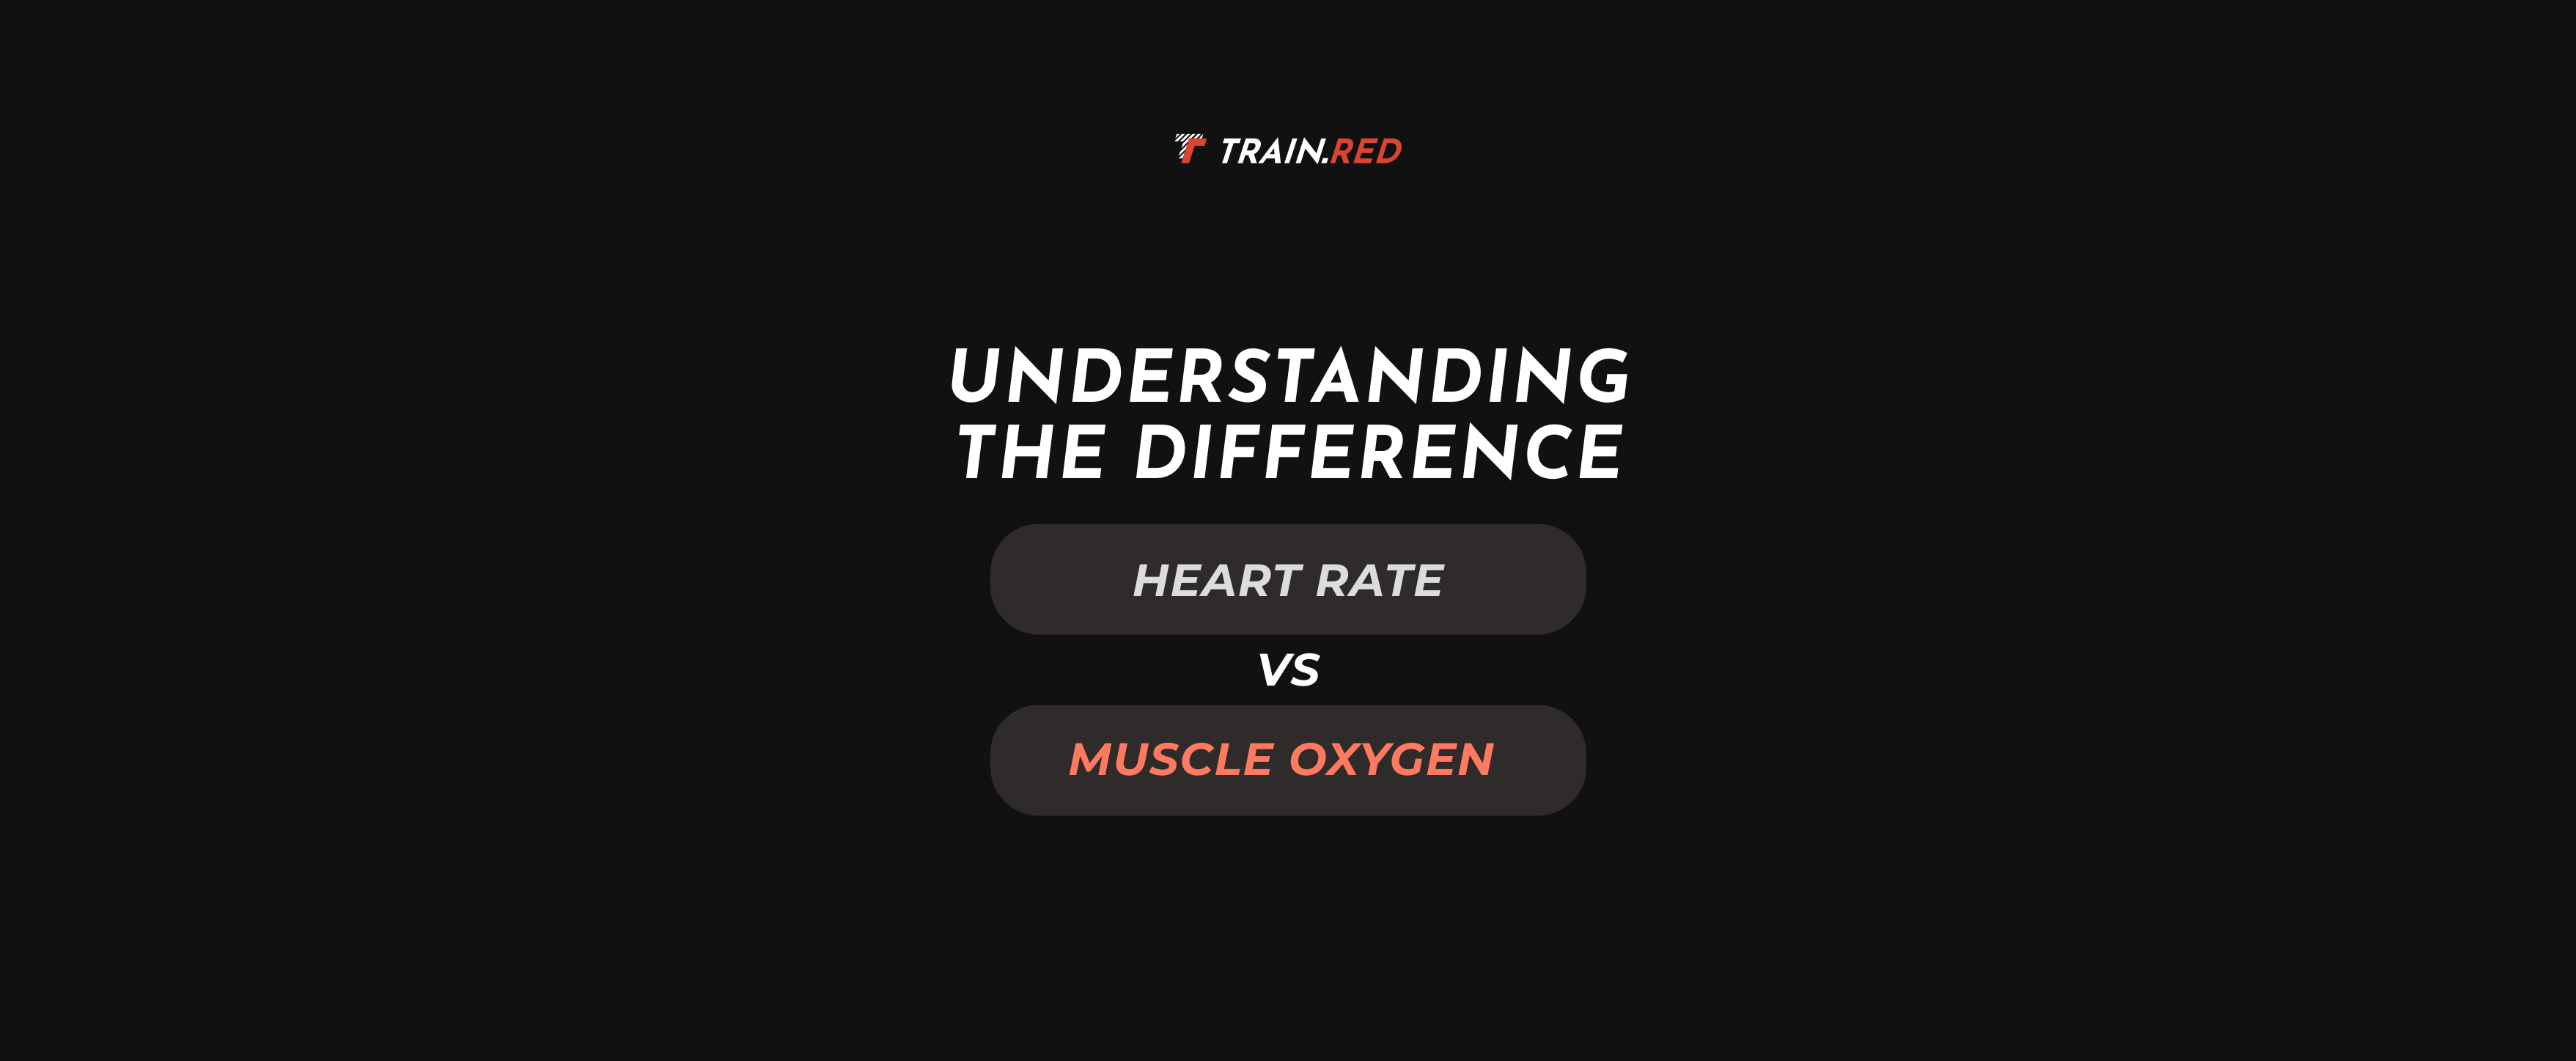 Muscle Oxygen Sensors versus a Heart Rate Sensor: Why Muscle Oxygen is the Best Option